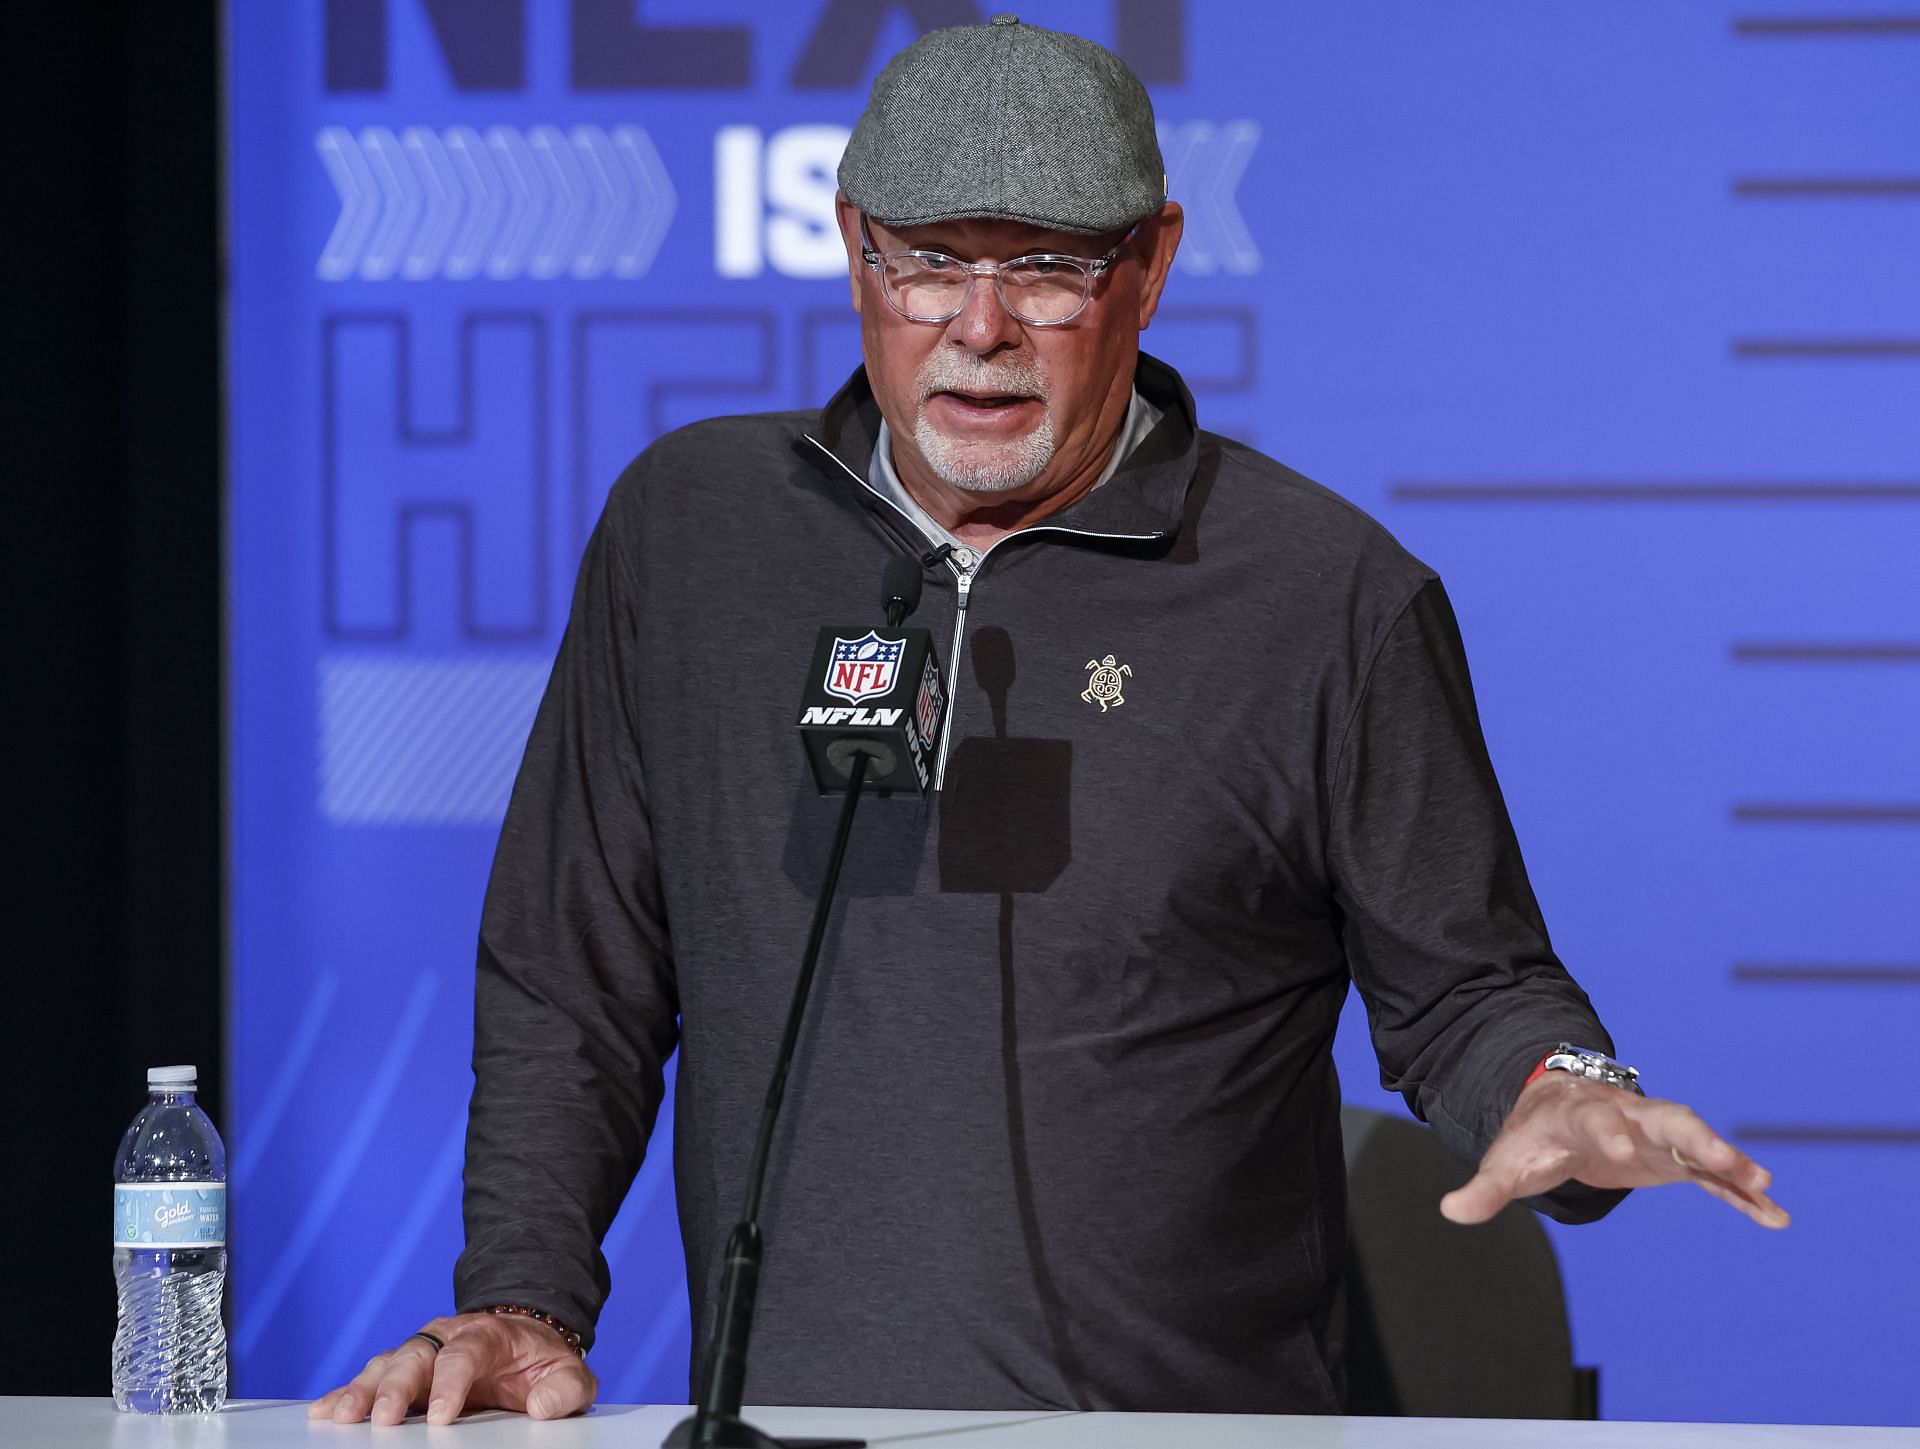 Bruce Arians at the 2022 NFL Combine